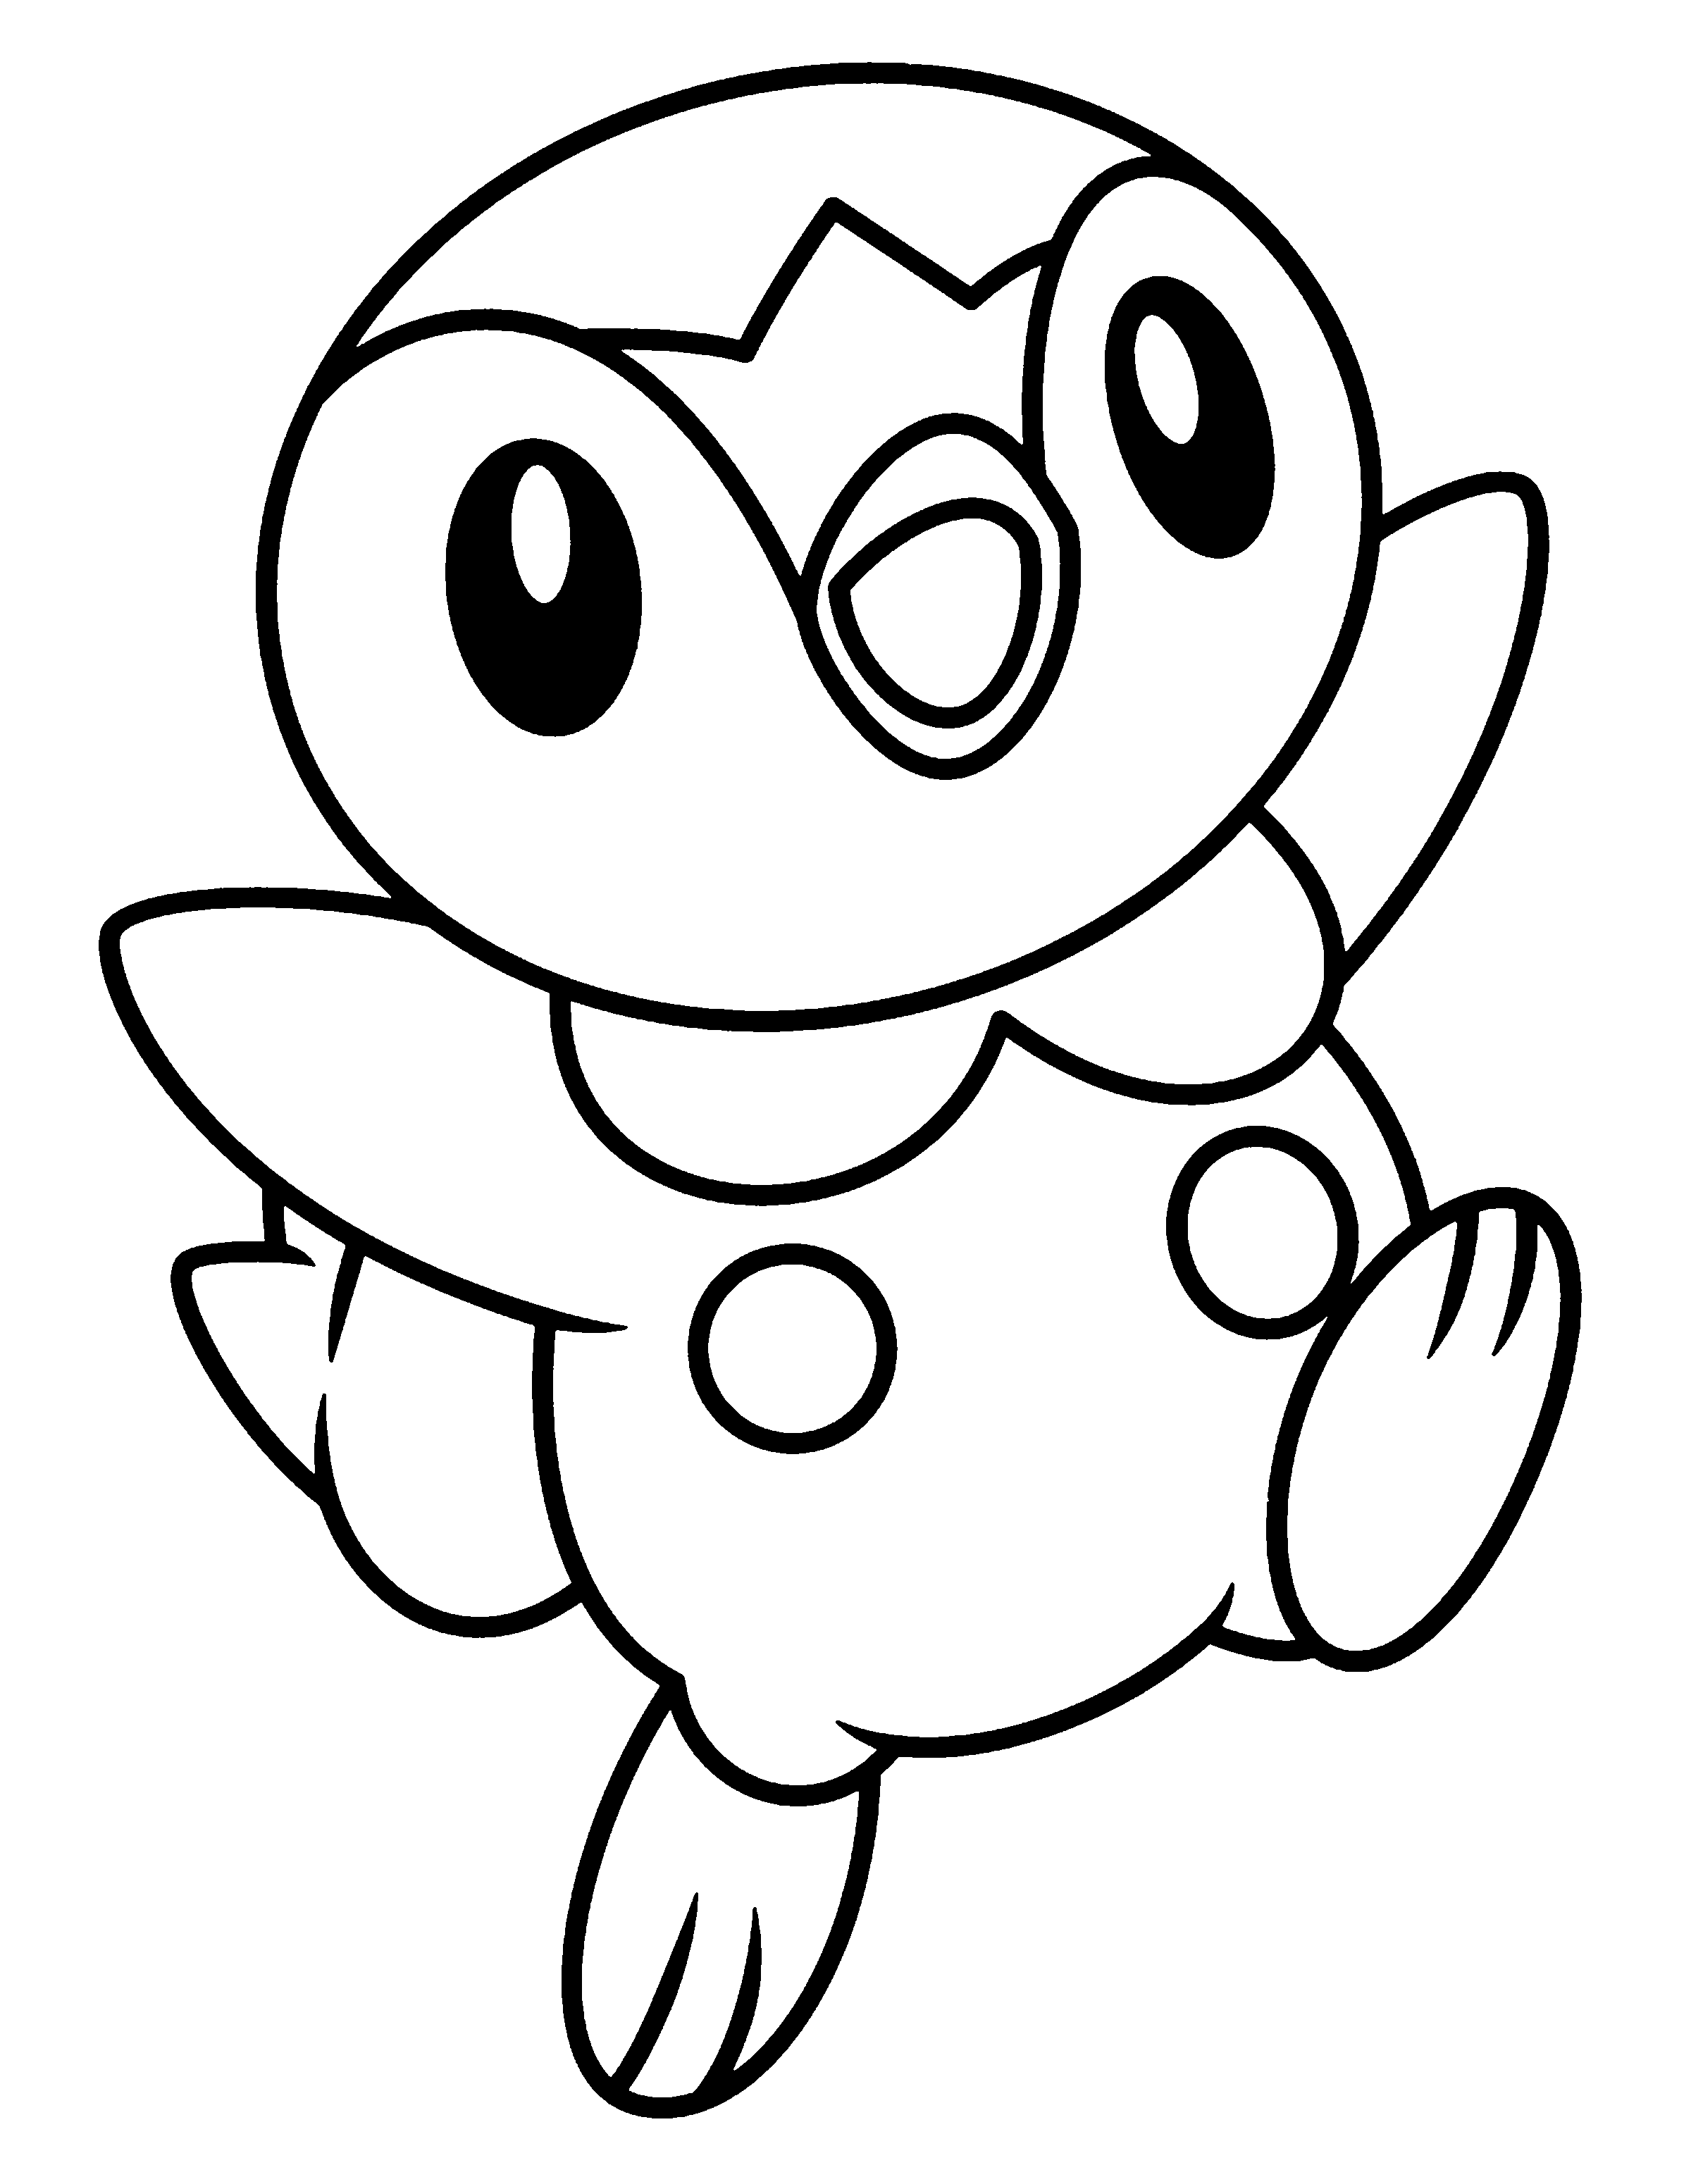 Coloring Pages Of Pokemon Legendaries - Coloring Page